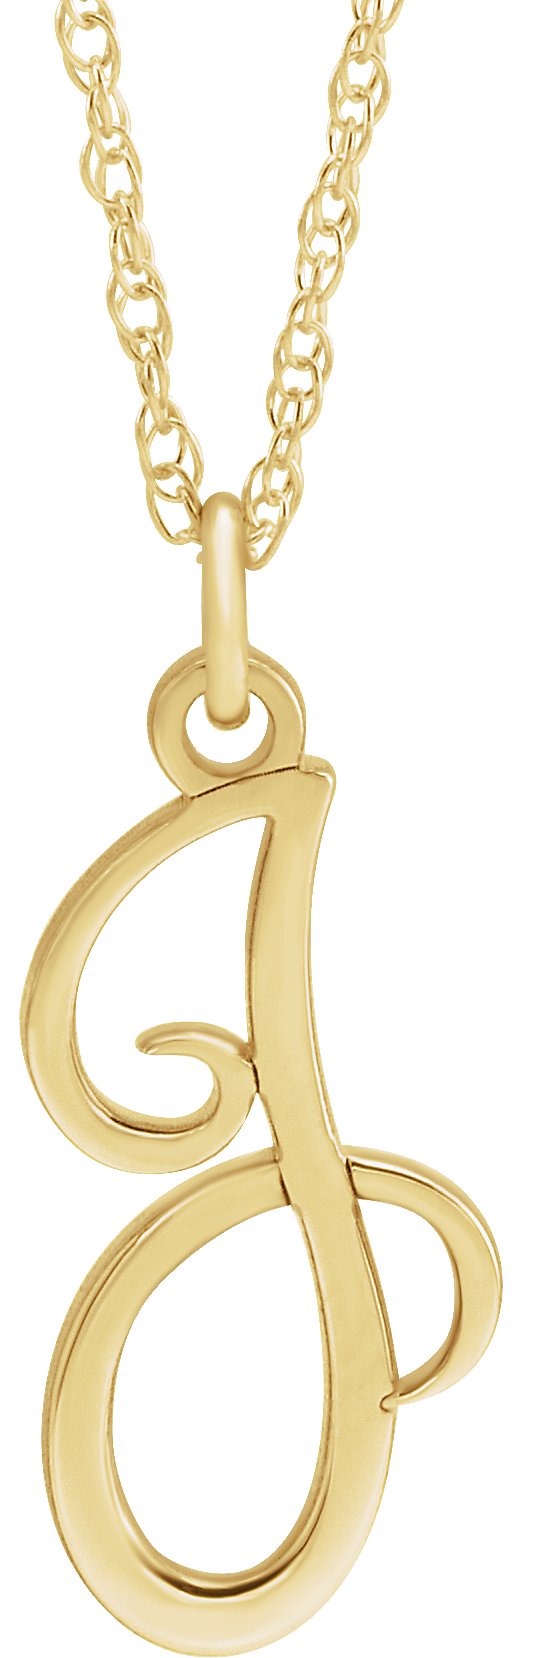 14K Yellow Gold-Plated Sterling Silver Script Initial J 16-18" Necklace